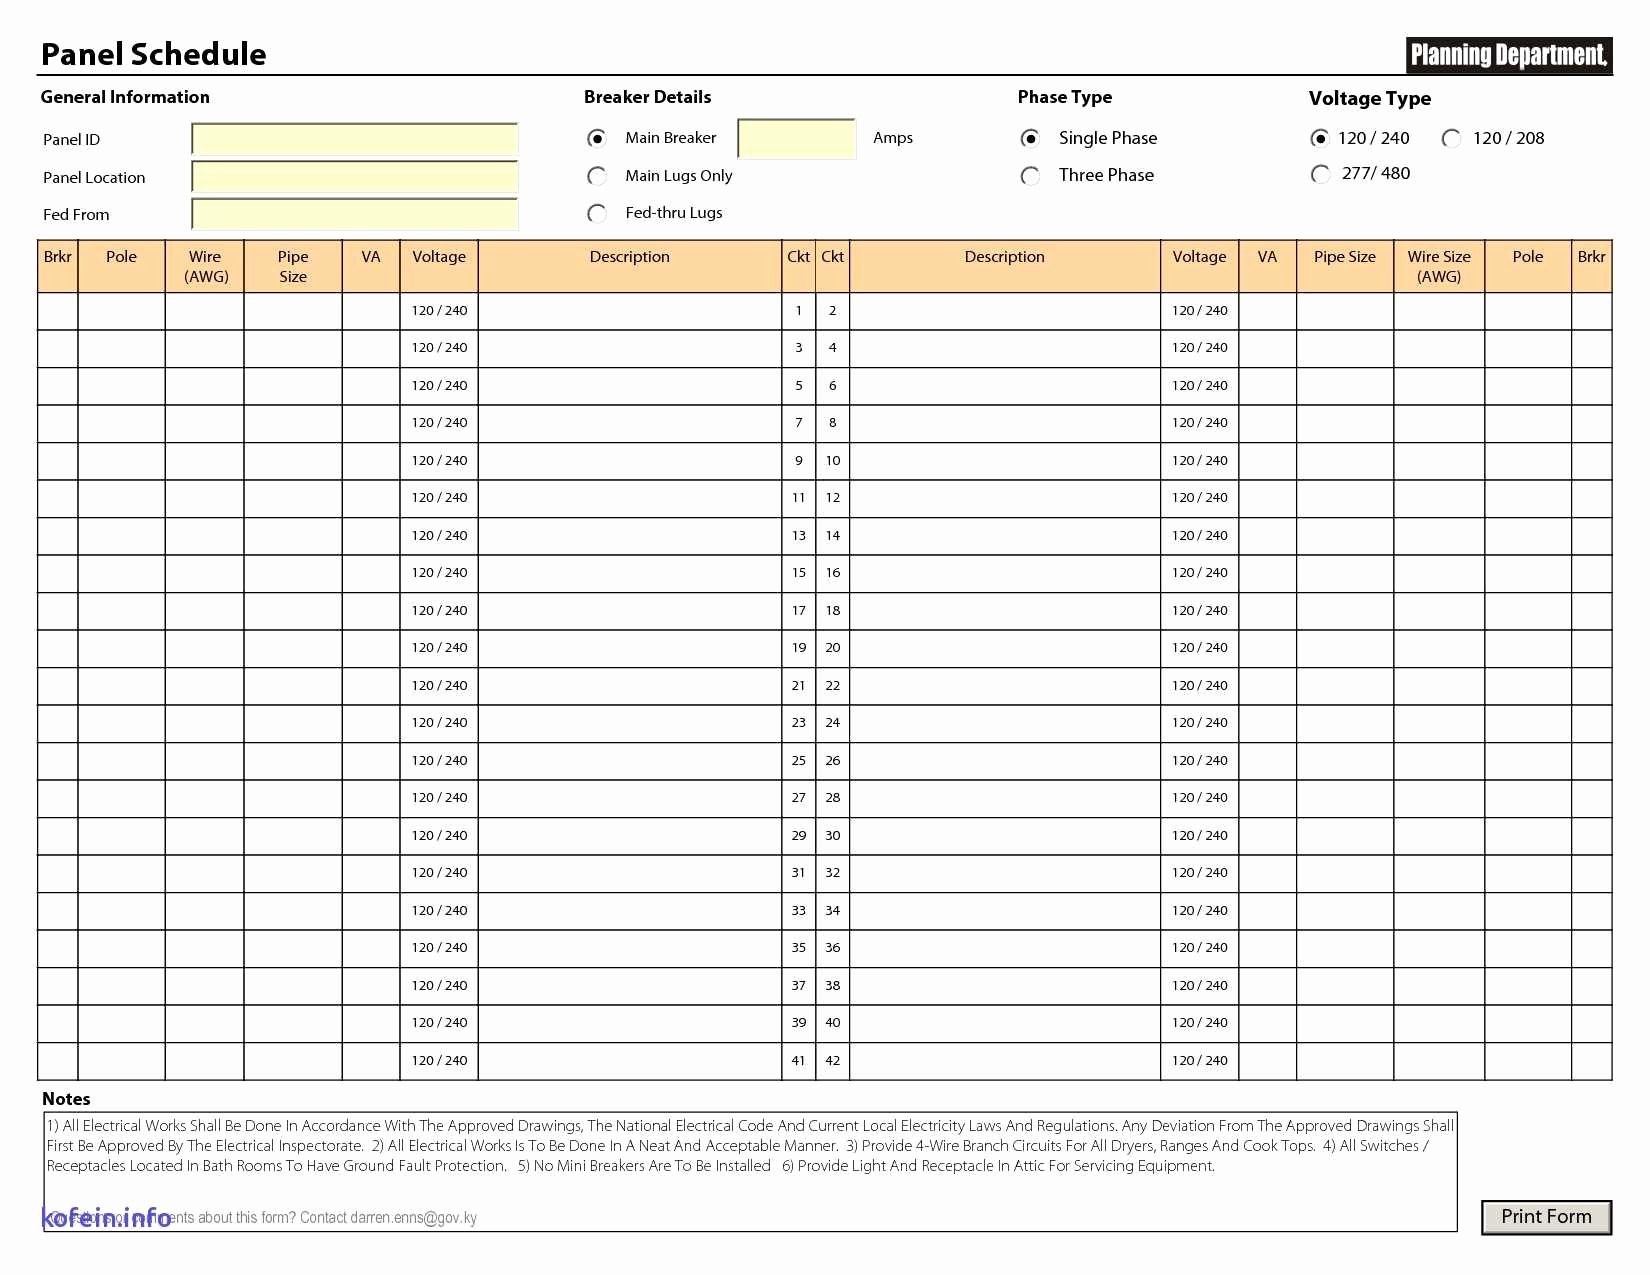 Electrical Panel Schedule Template Excel Fresh Electrical Panel Schedule Template Excel